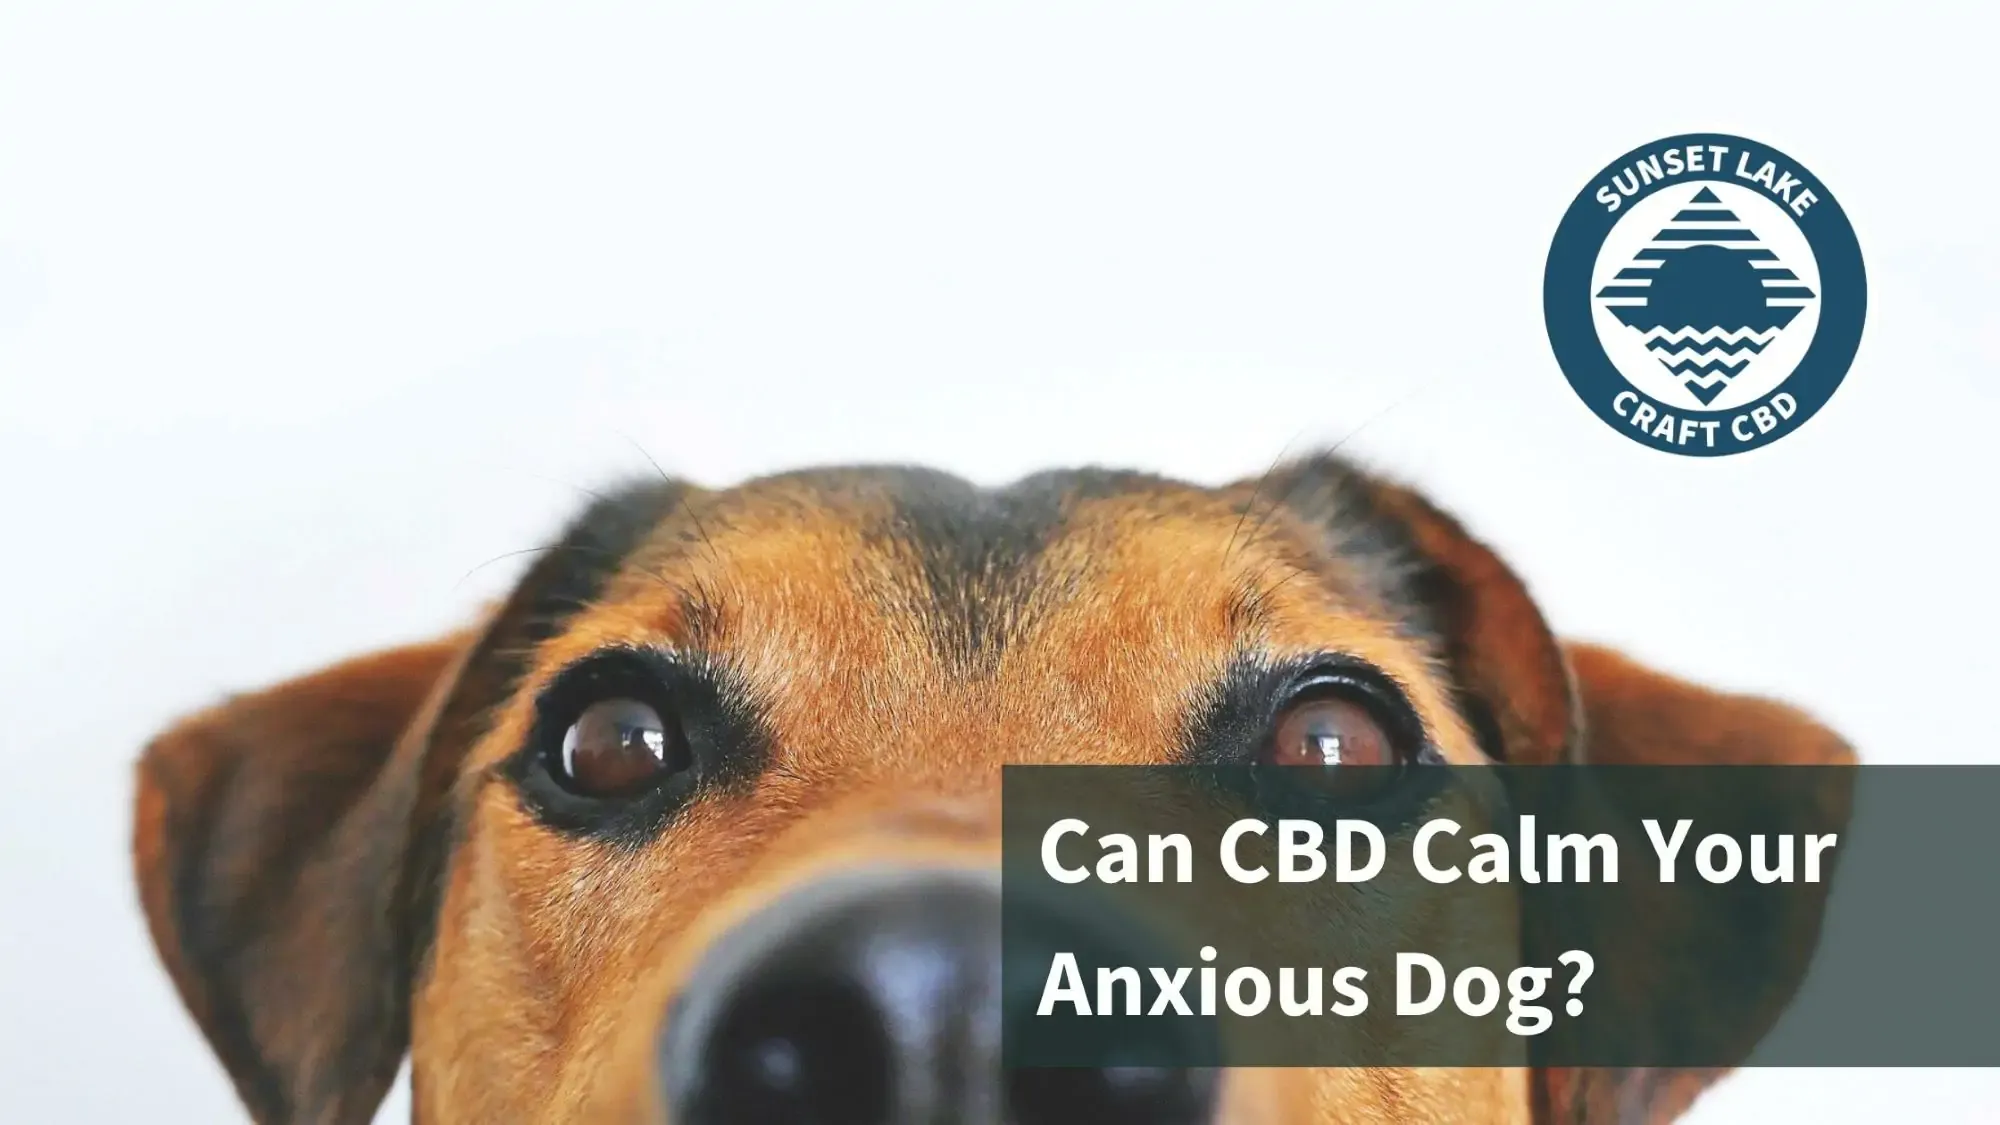 Top of a dog's head. Text says "Can CBD Calm Your Anxious Dog?"